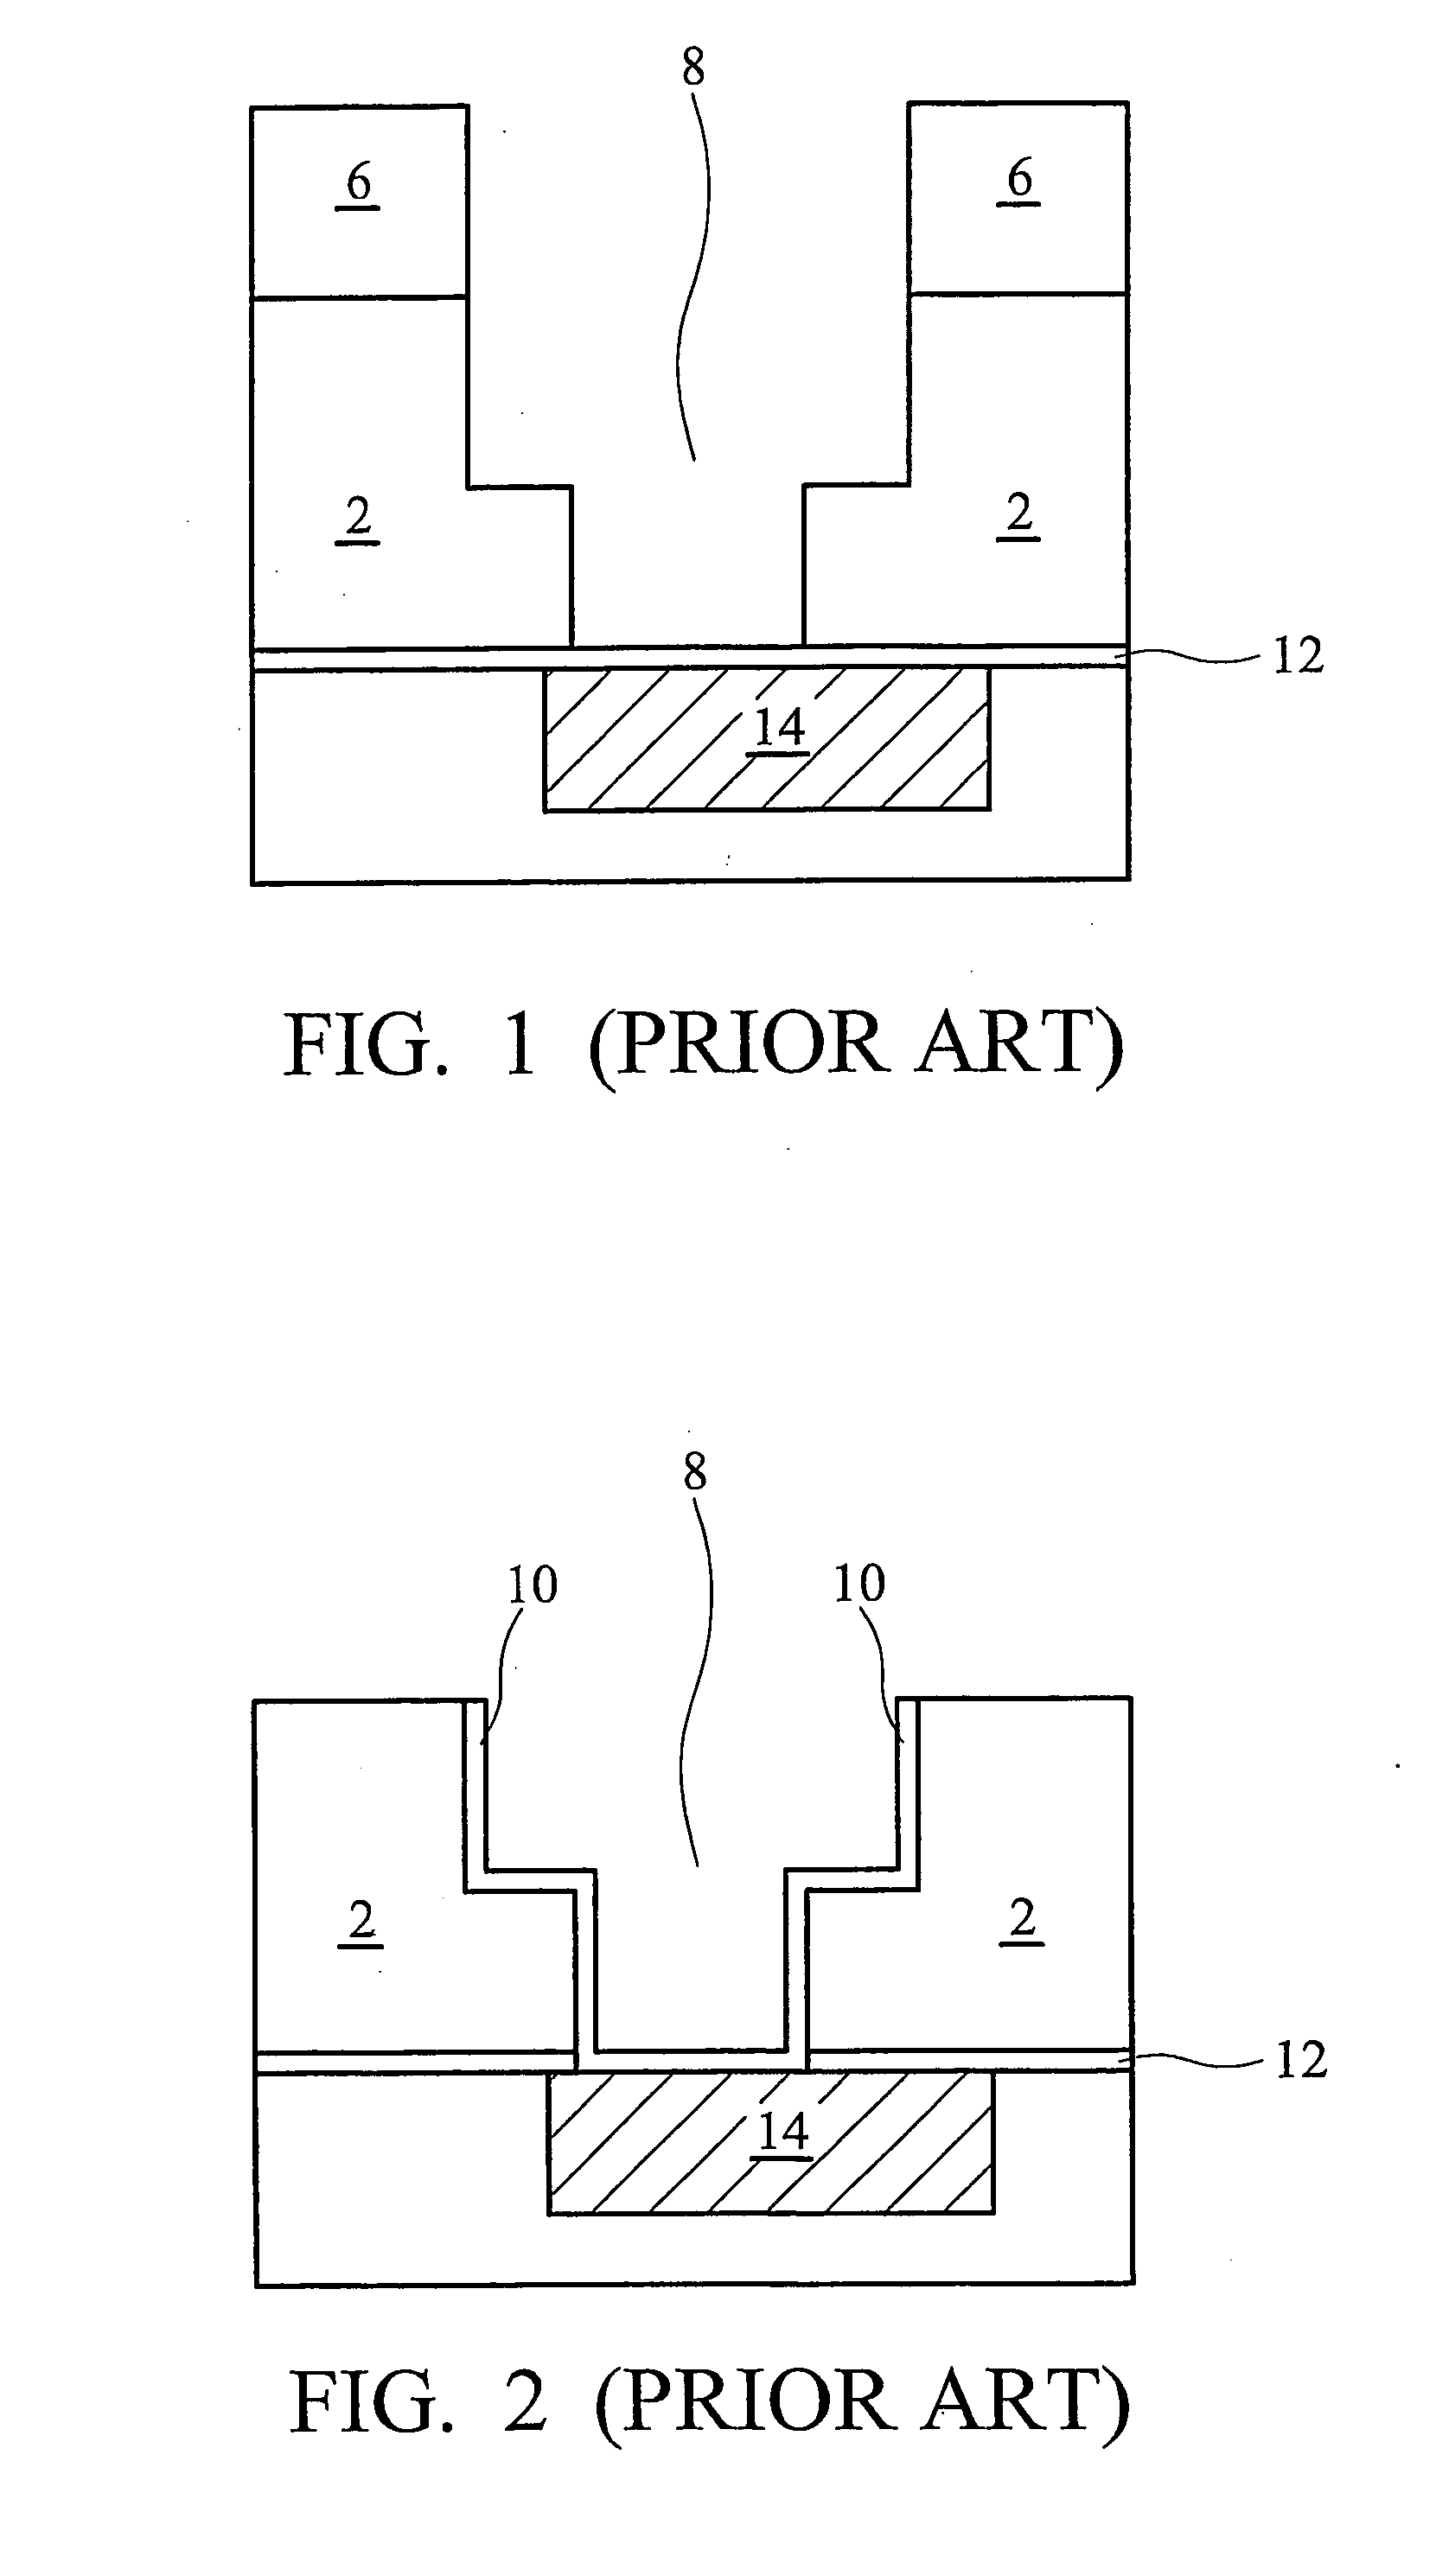 Cleaning processes in the formation of integrated circuit interconnect structures